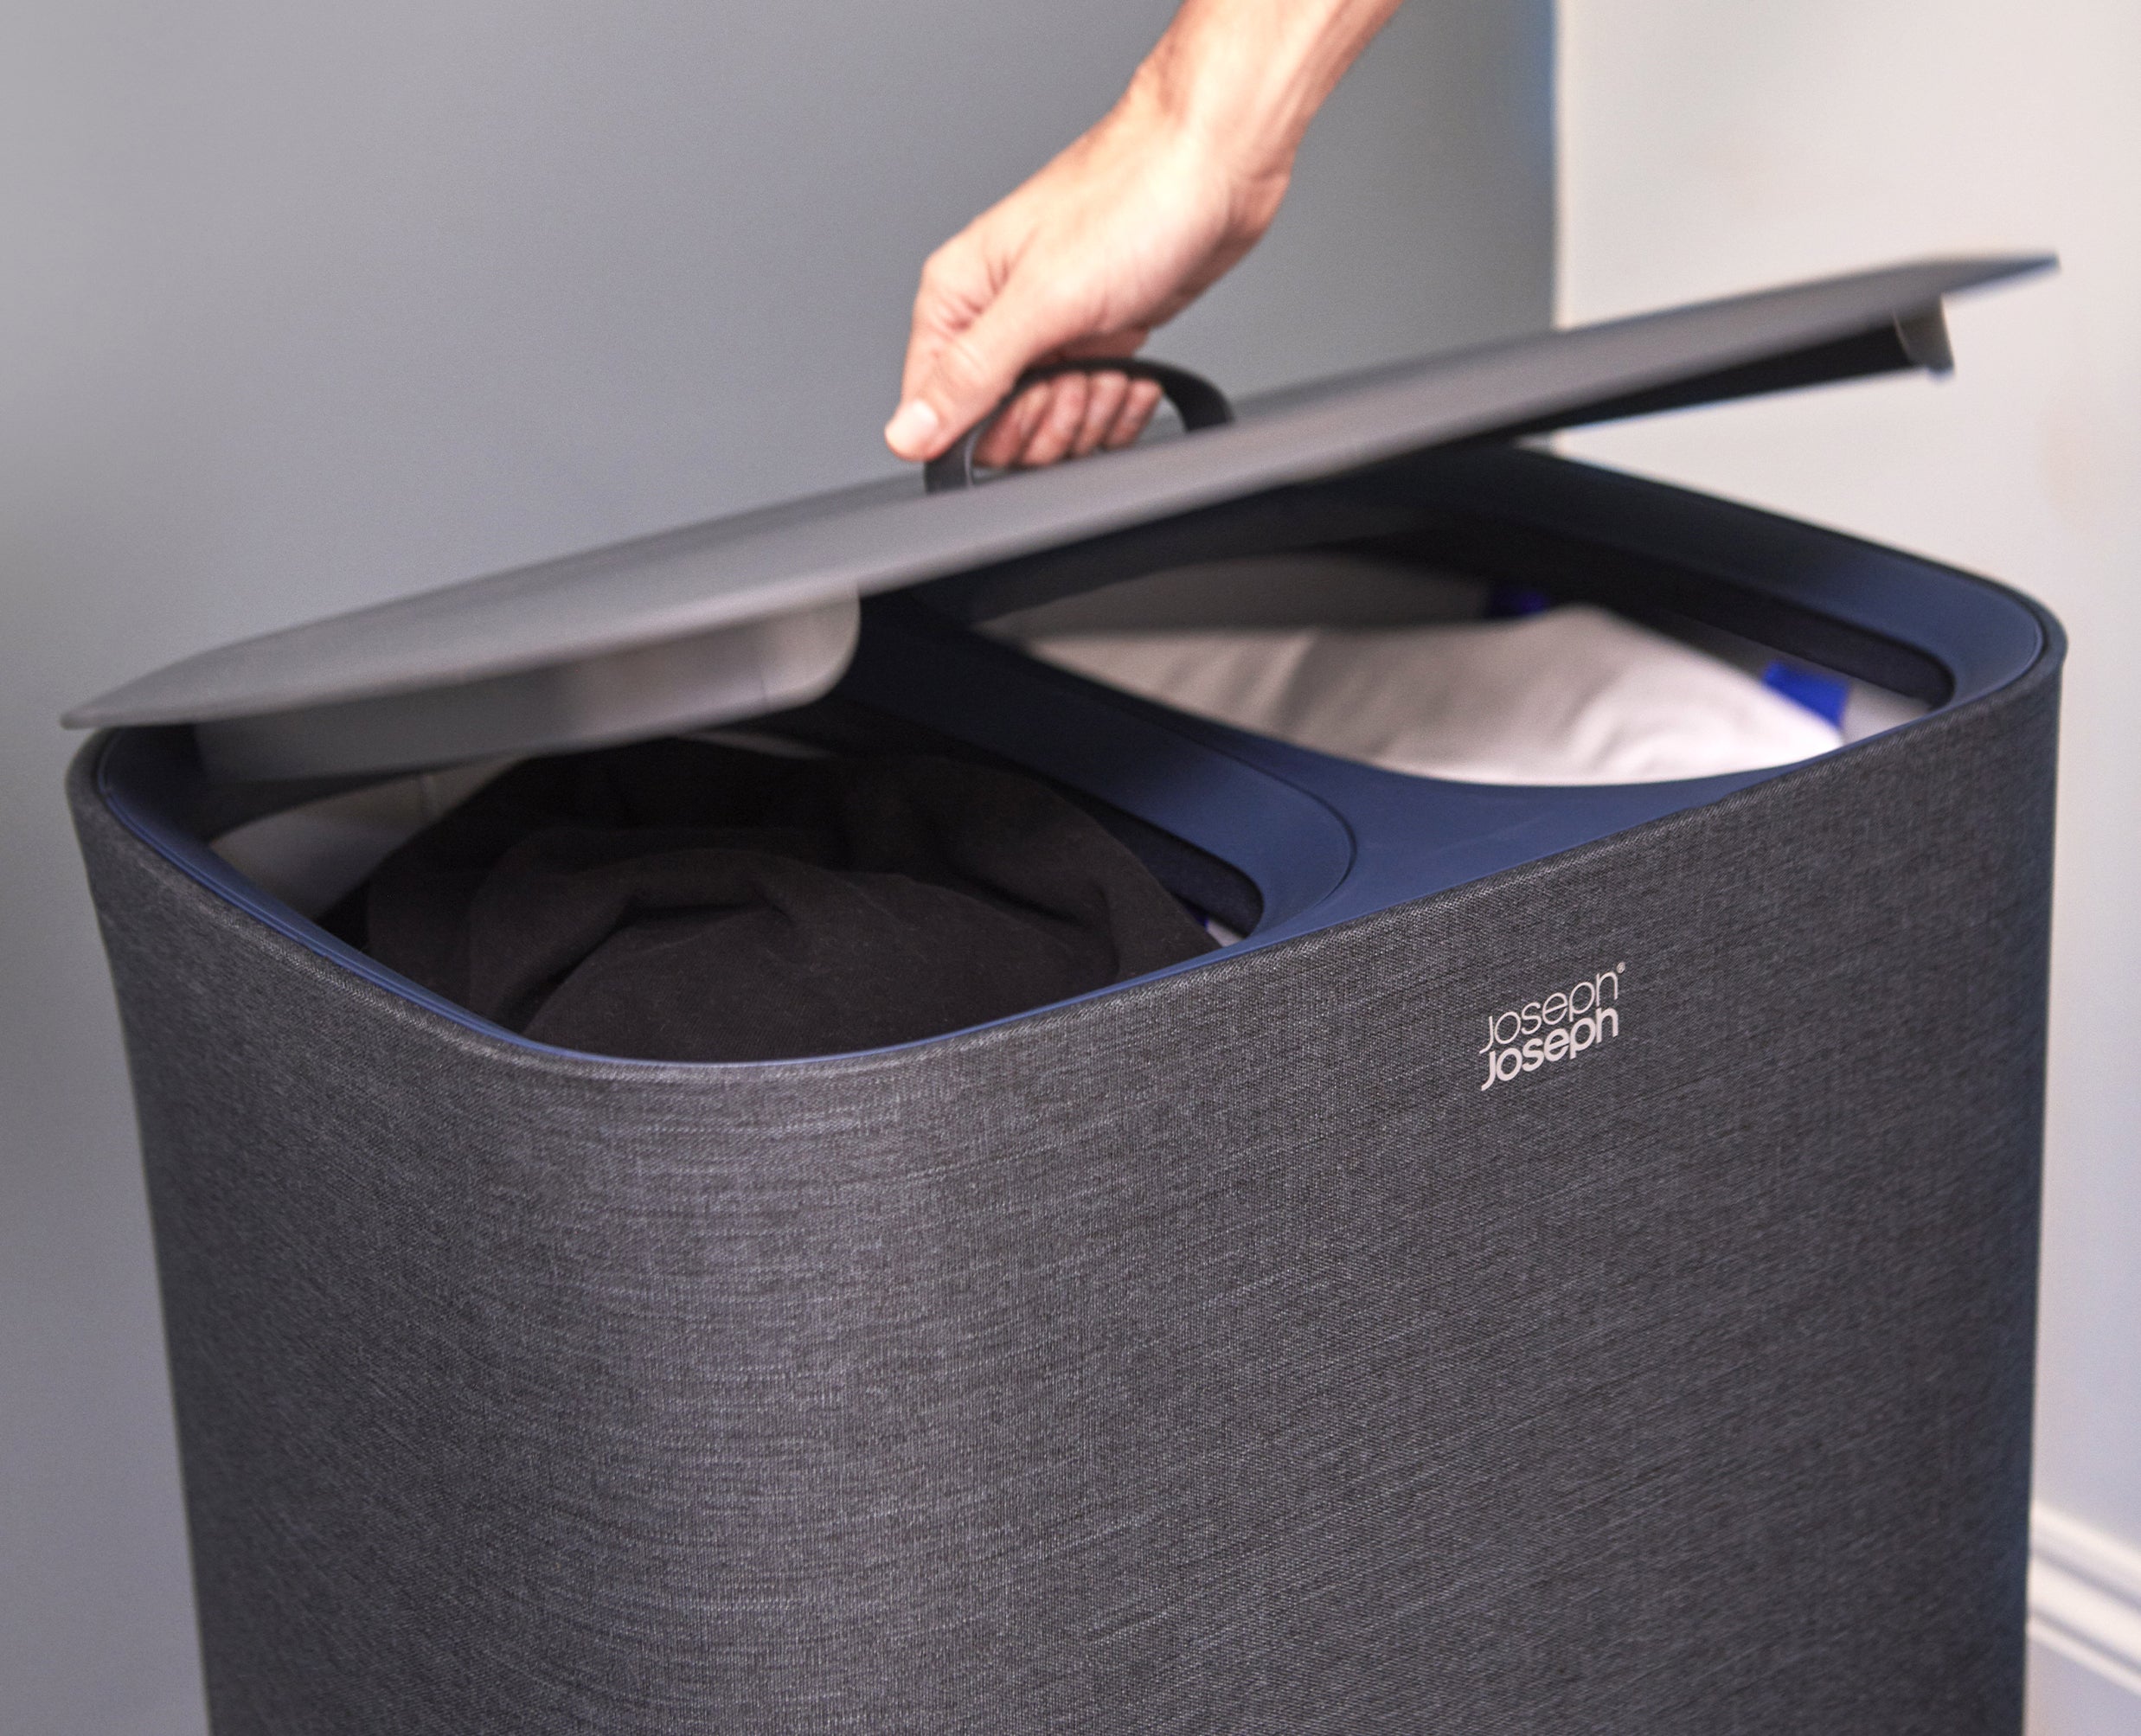 BEON.COM.AU Product Details Separate your lights and darks as you go with the two compartments of this handy laundry basket, meaning you're all ready to go on wash day.  Dual 45-litre compartments for easy separation of fabrics Removable tote bags with easy-carry handles Helper handle on base of bags mak... Joseph Joseph at BEON.COM.AU